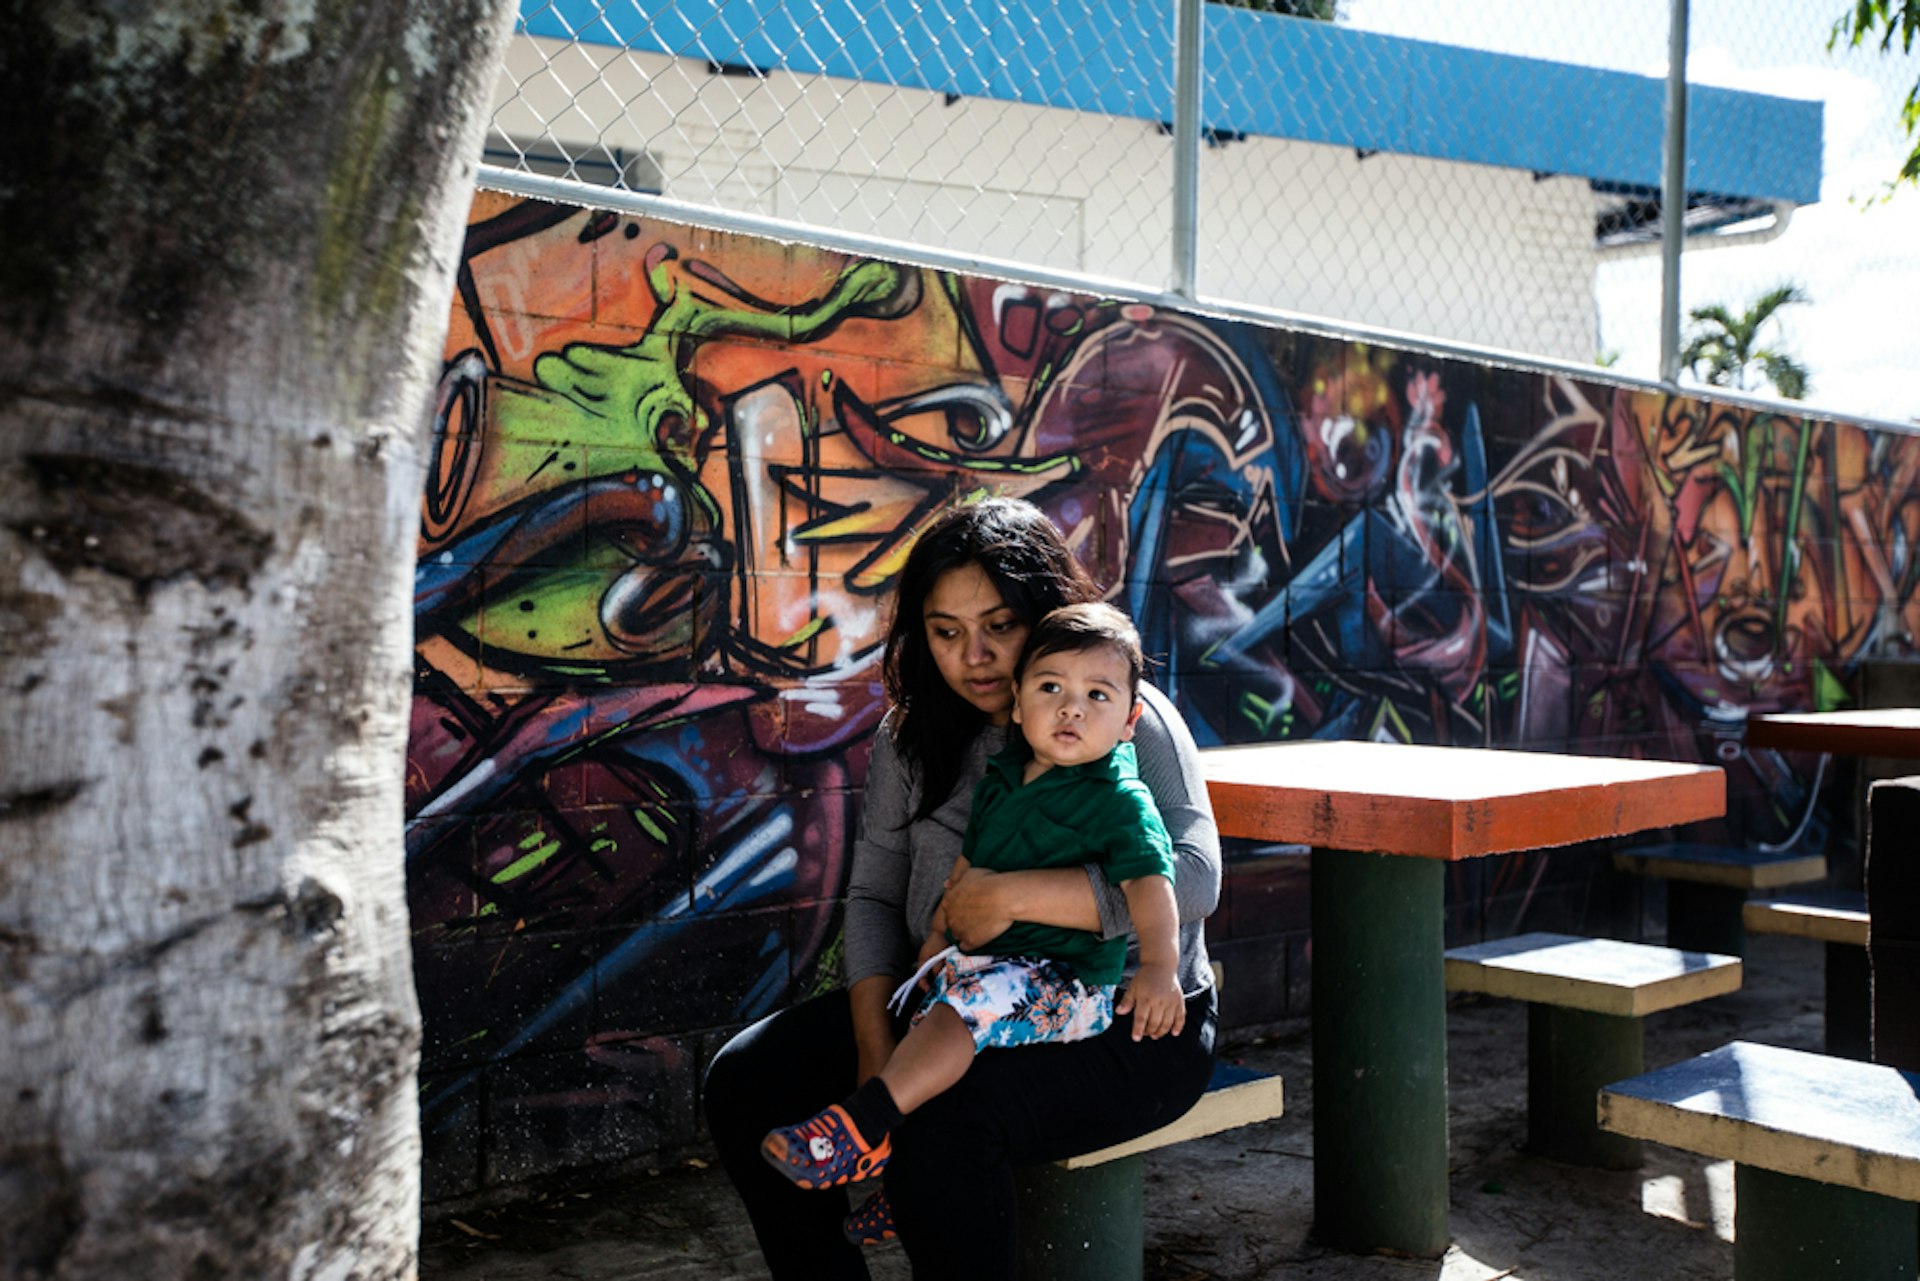 Yerly sits with her son Matías at a local park, next to some graffiti she made for her husband Caesar.